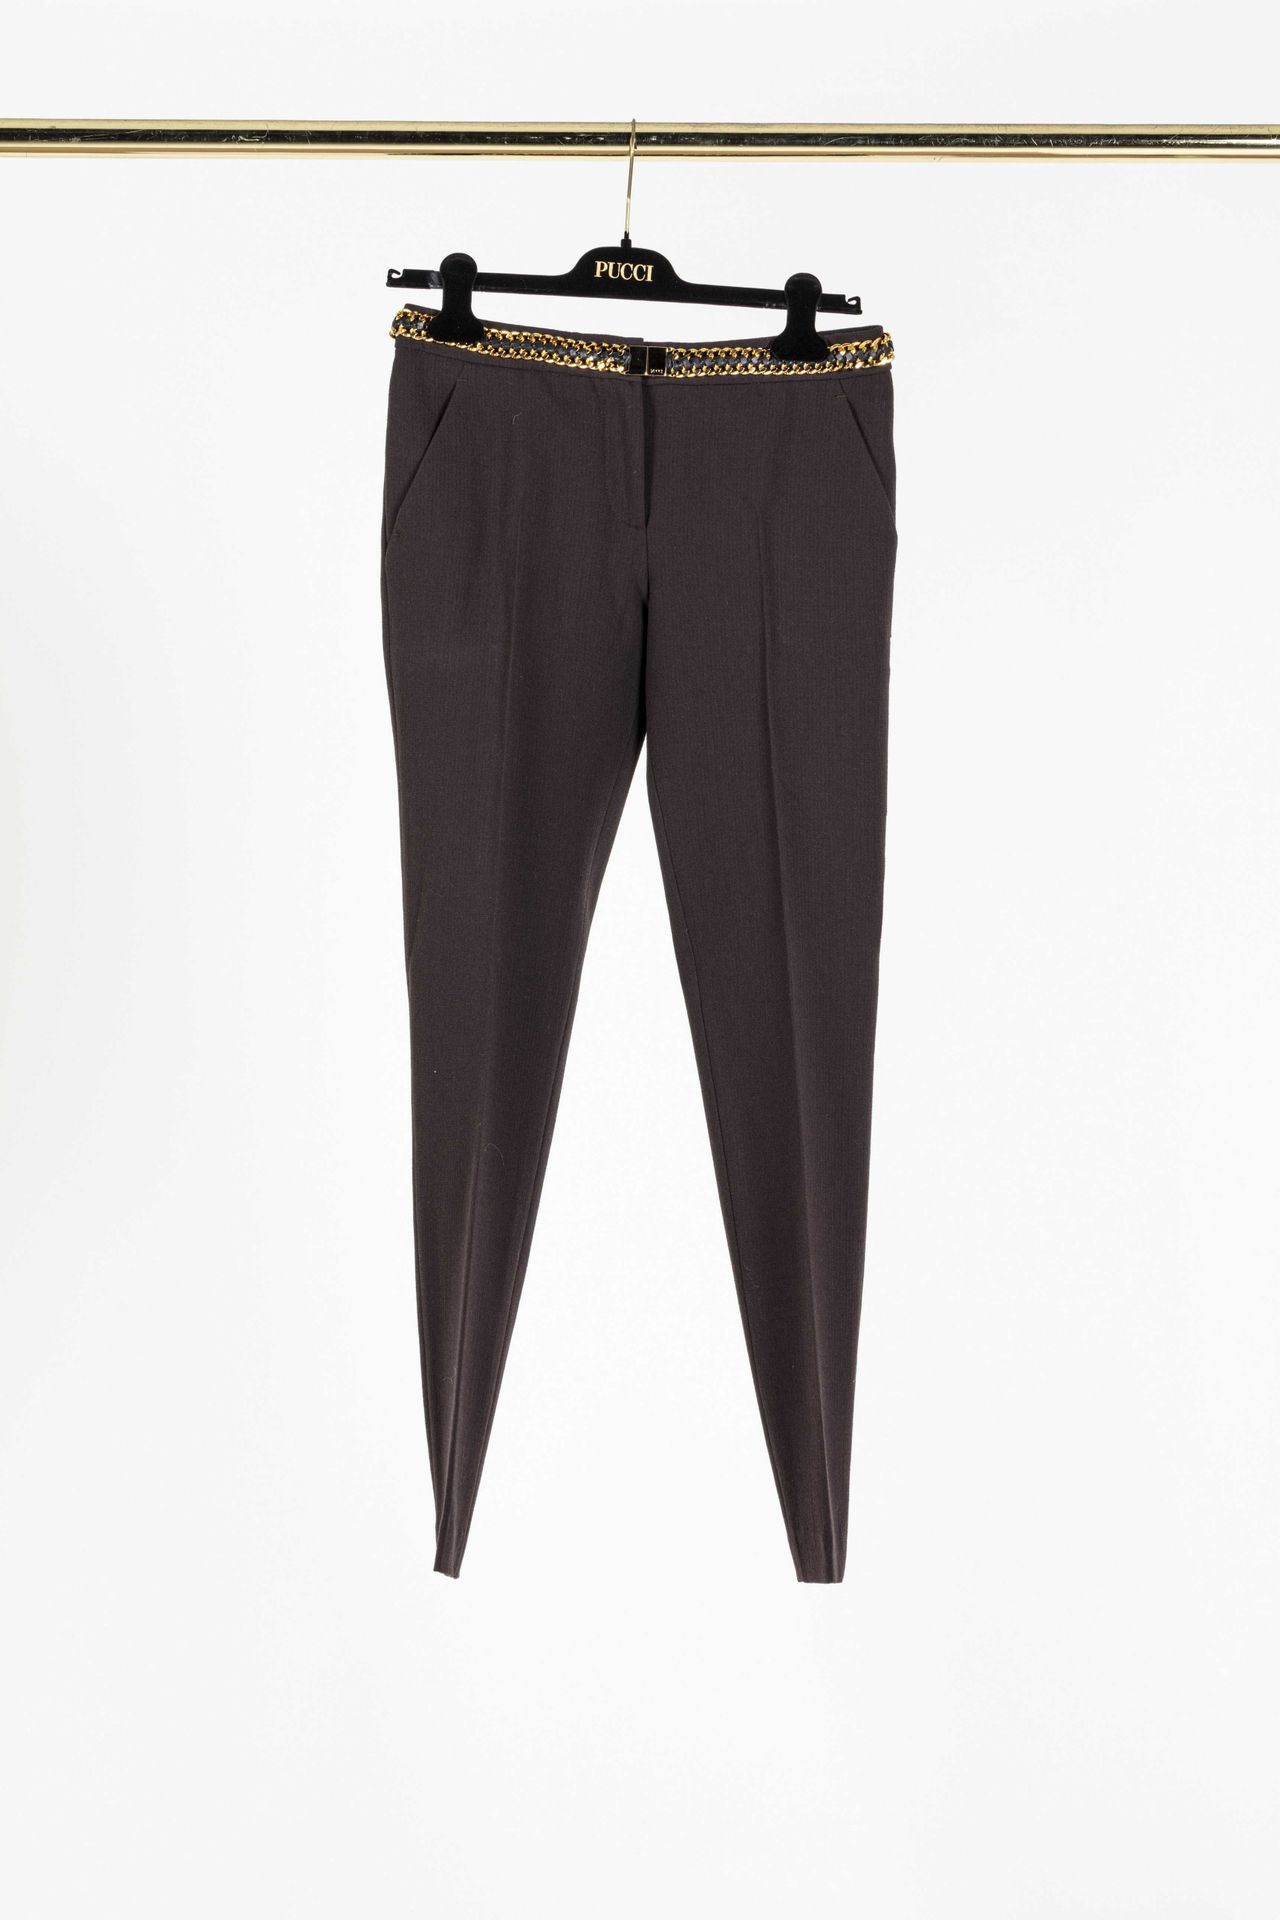 Null EMILIO PUCCI: straight trousers in brown wool and elastane, belt stylized w&hellip;